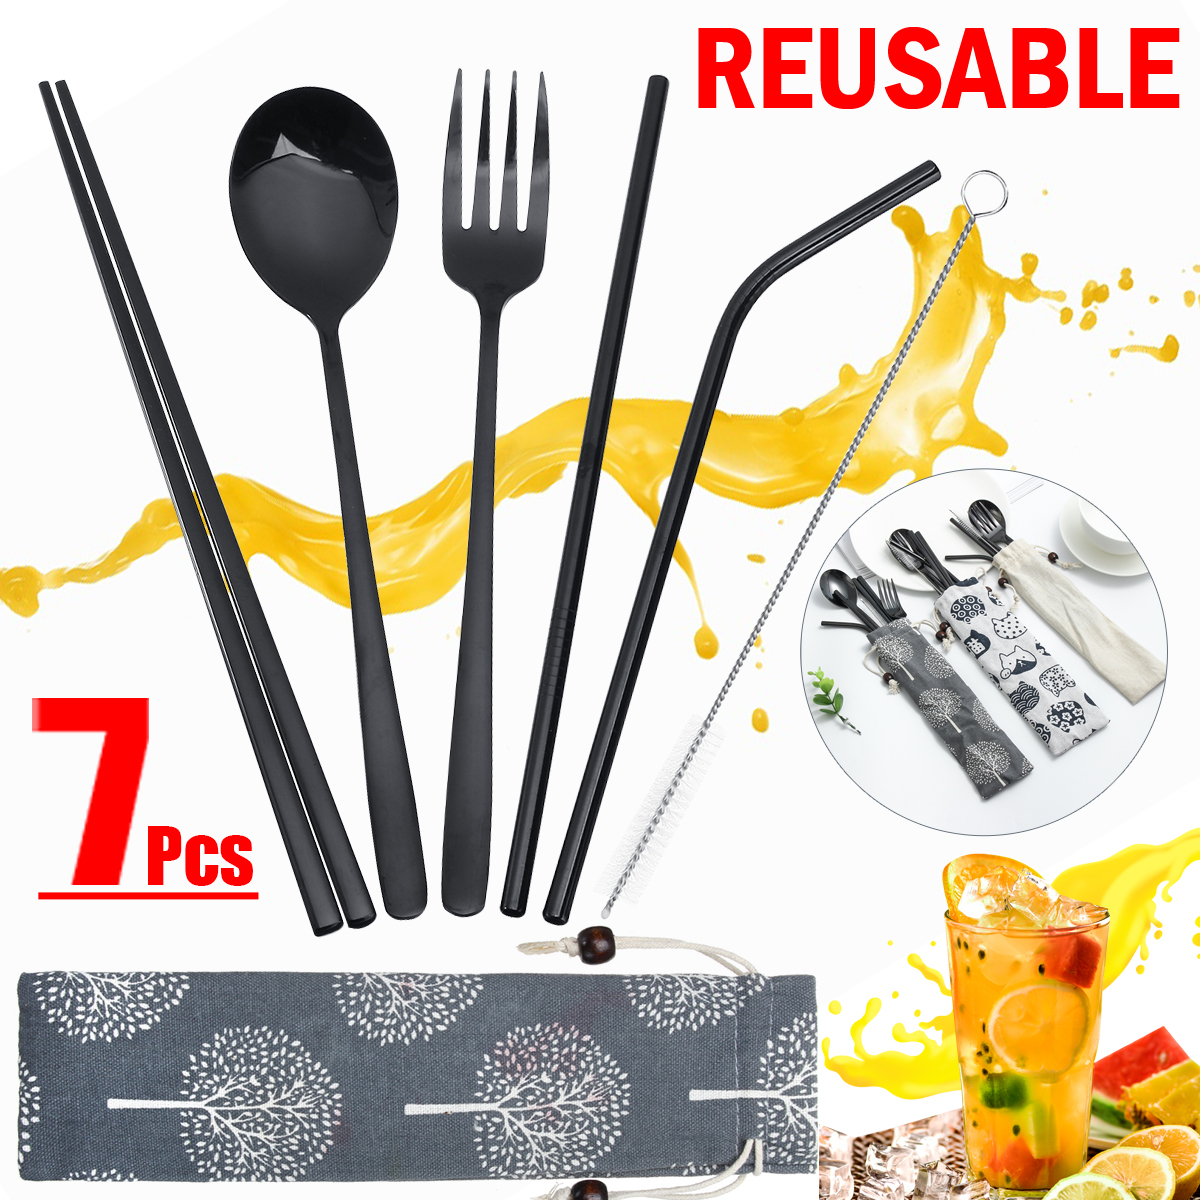 Portable-304-Stainless-Steel-Drinking-Straw-Spoon-Reusable-Straws-Fork-Chopsticks-Brush-Combination--1529584-1